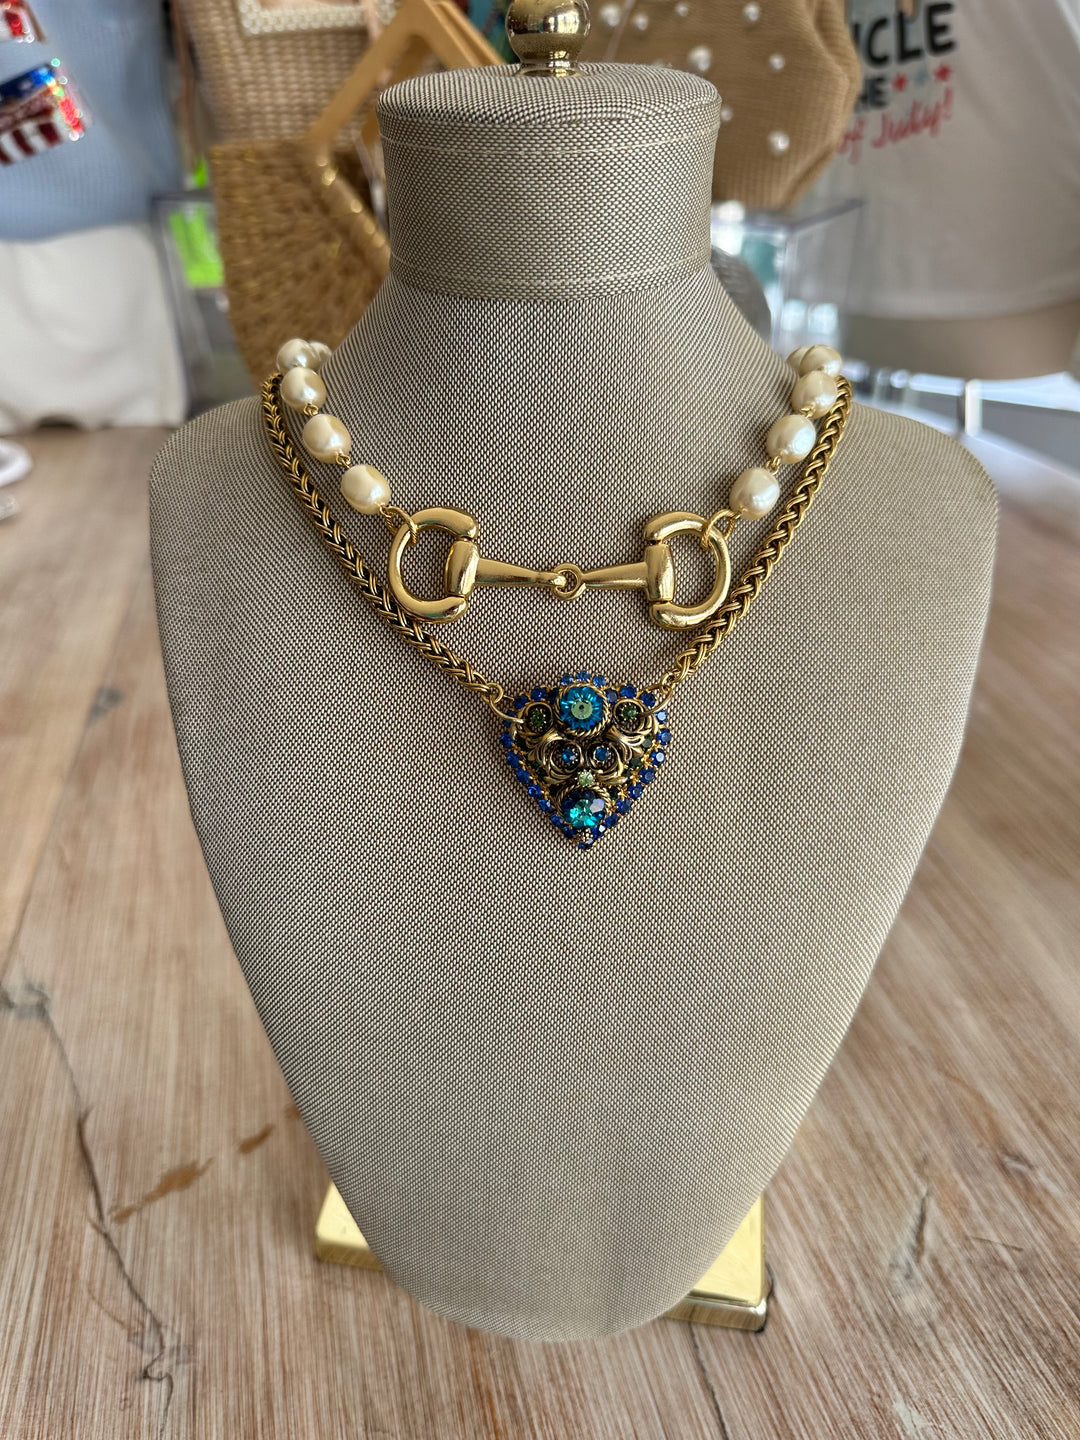 Vintage Chain With Vintage Blue Stone Broach-Accessories-Erin Knight Designs-Shop with Bloom West Boutique, Women's Fashion Boutique, Located in Houma, Louisiana